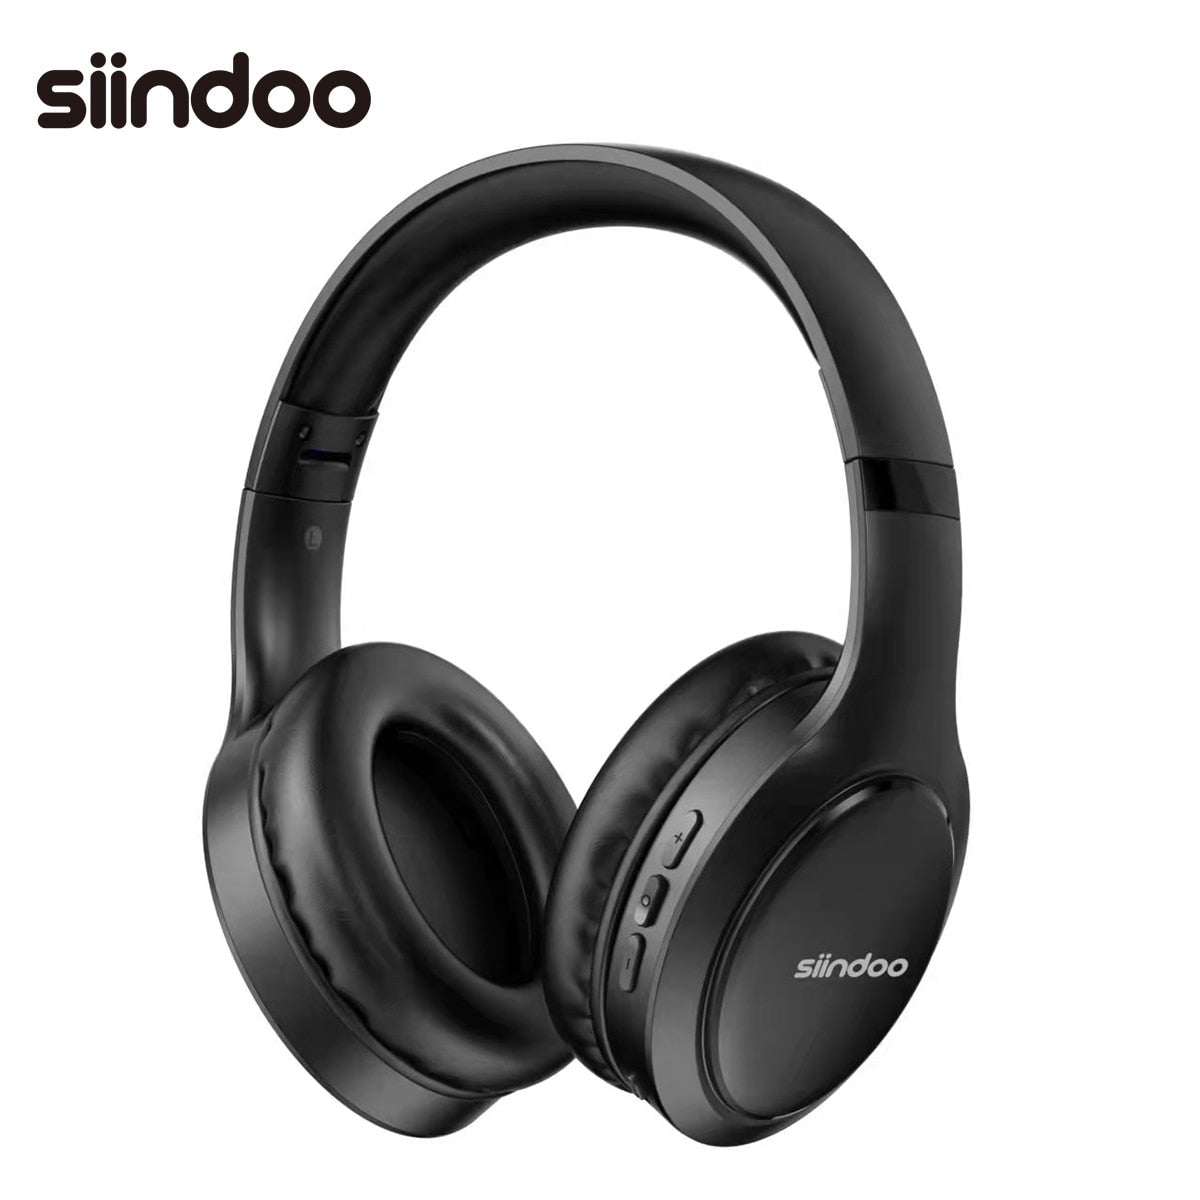 Siindoo JH-919 Wireless Bluetooth Headphones Foldable Stereo Earphones Super Bass Noise Reduction Mic For Iphone Laptop PC TV